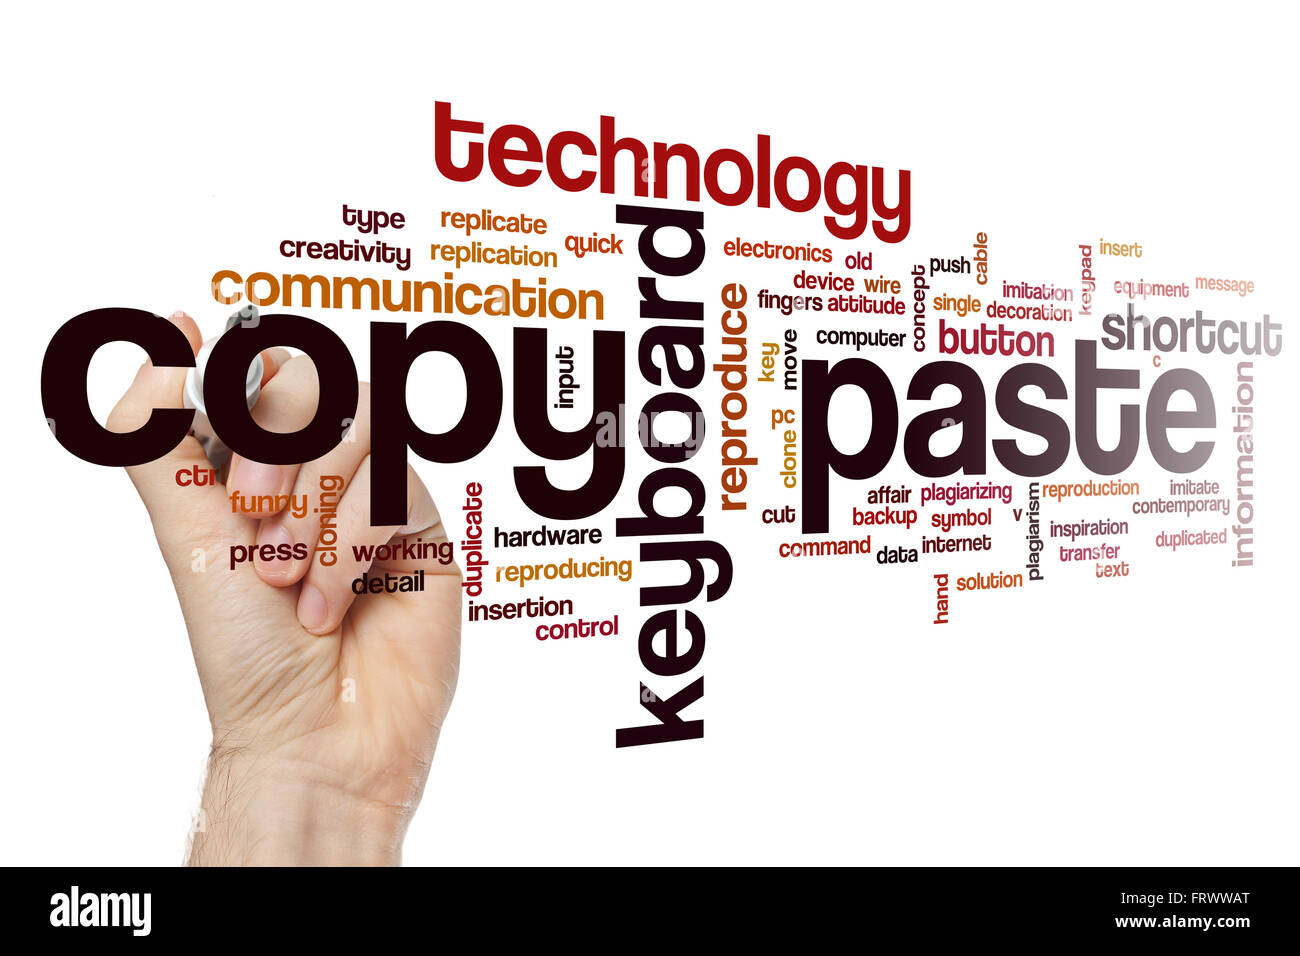 Copy paste Cut Out Stock Images & Pictures - Alamy